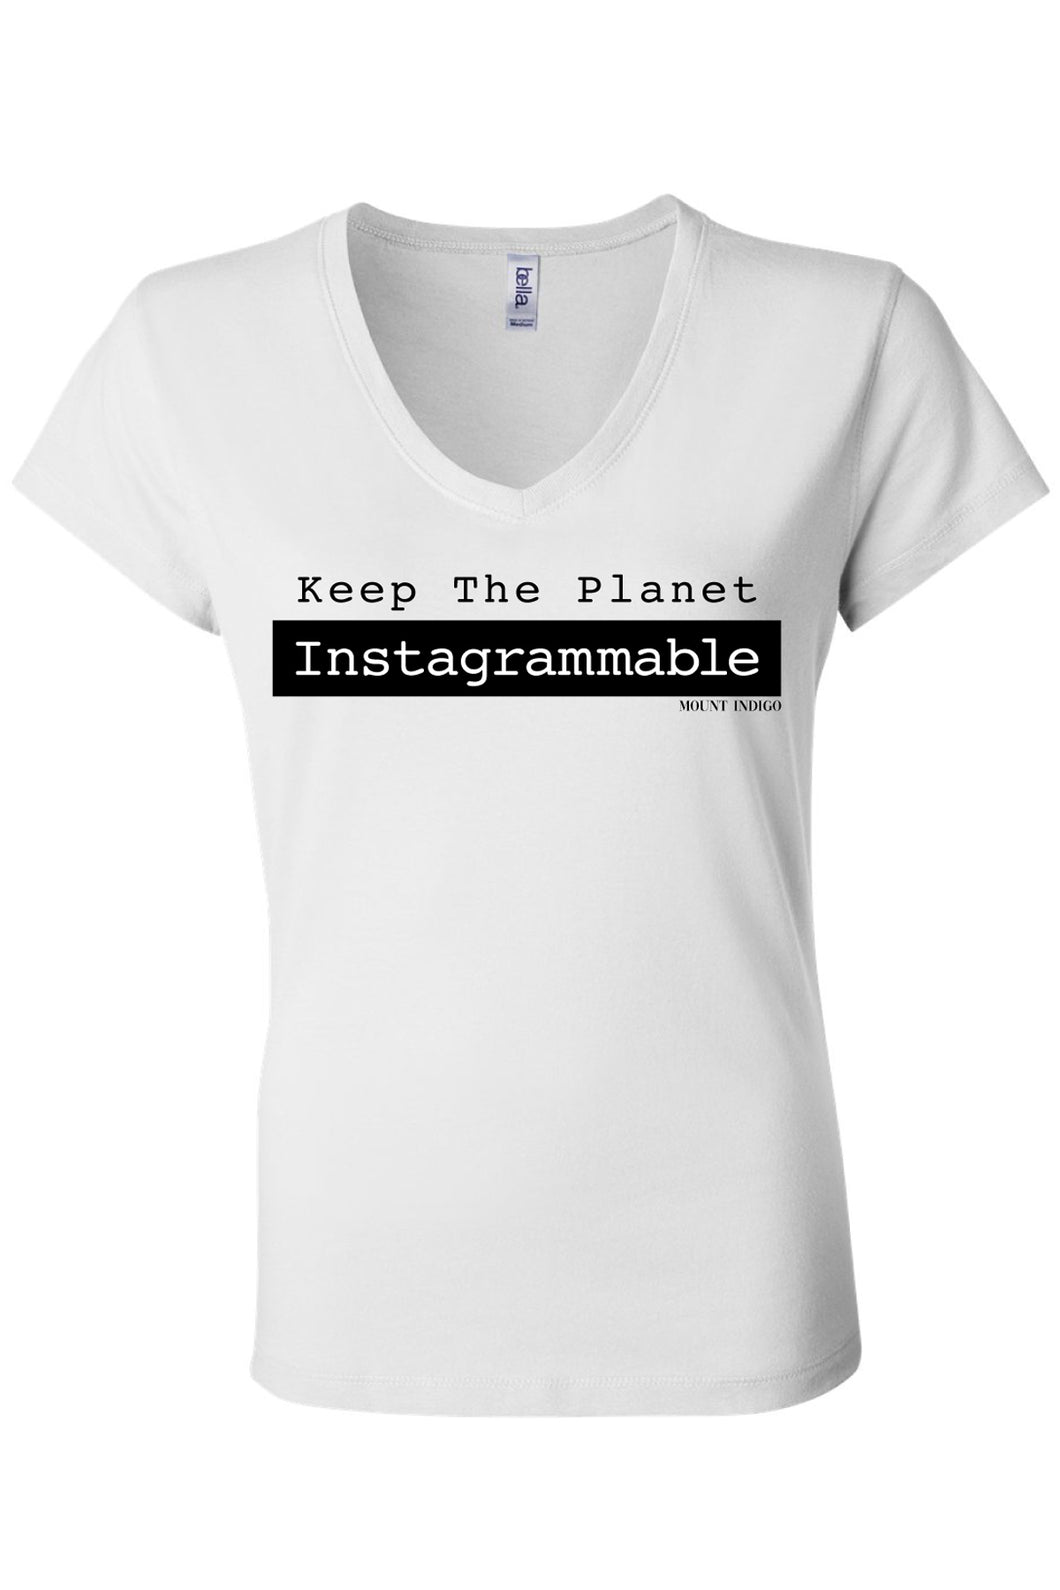 Keep The Planet Instagrammable Typewriter Tee